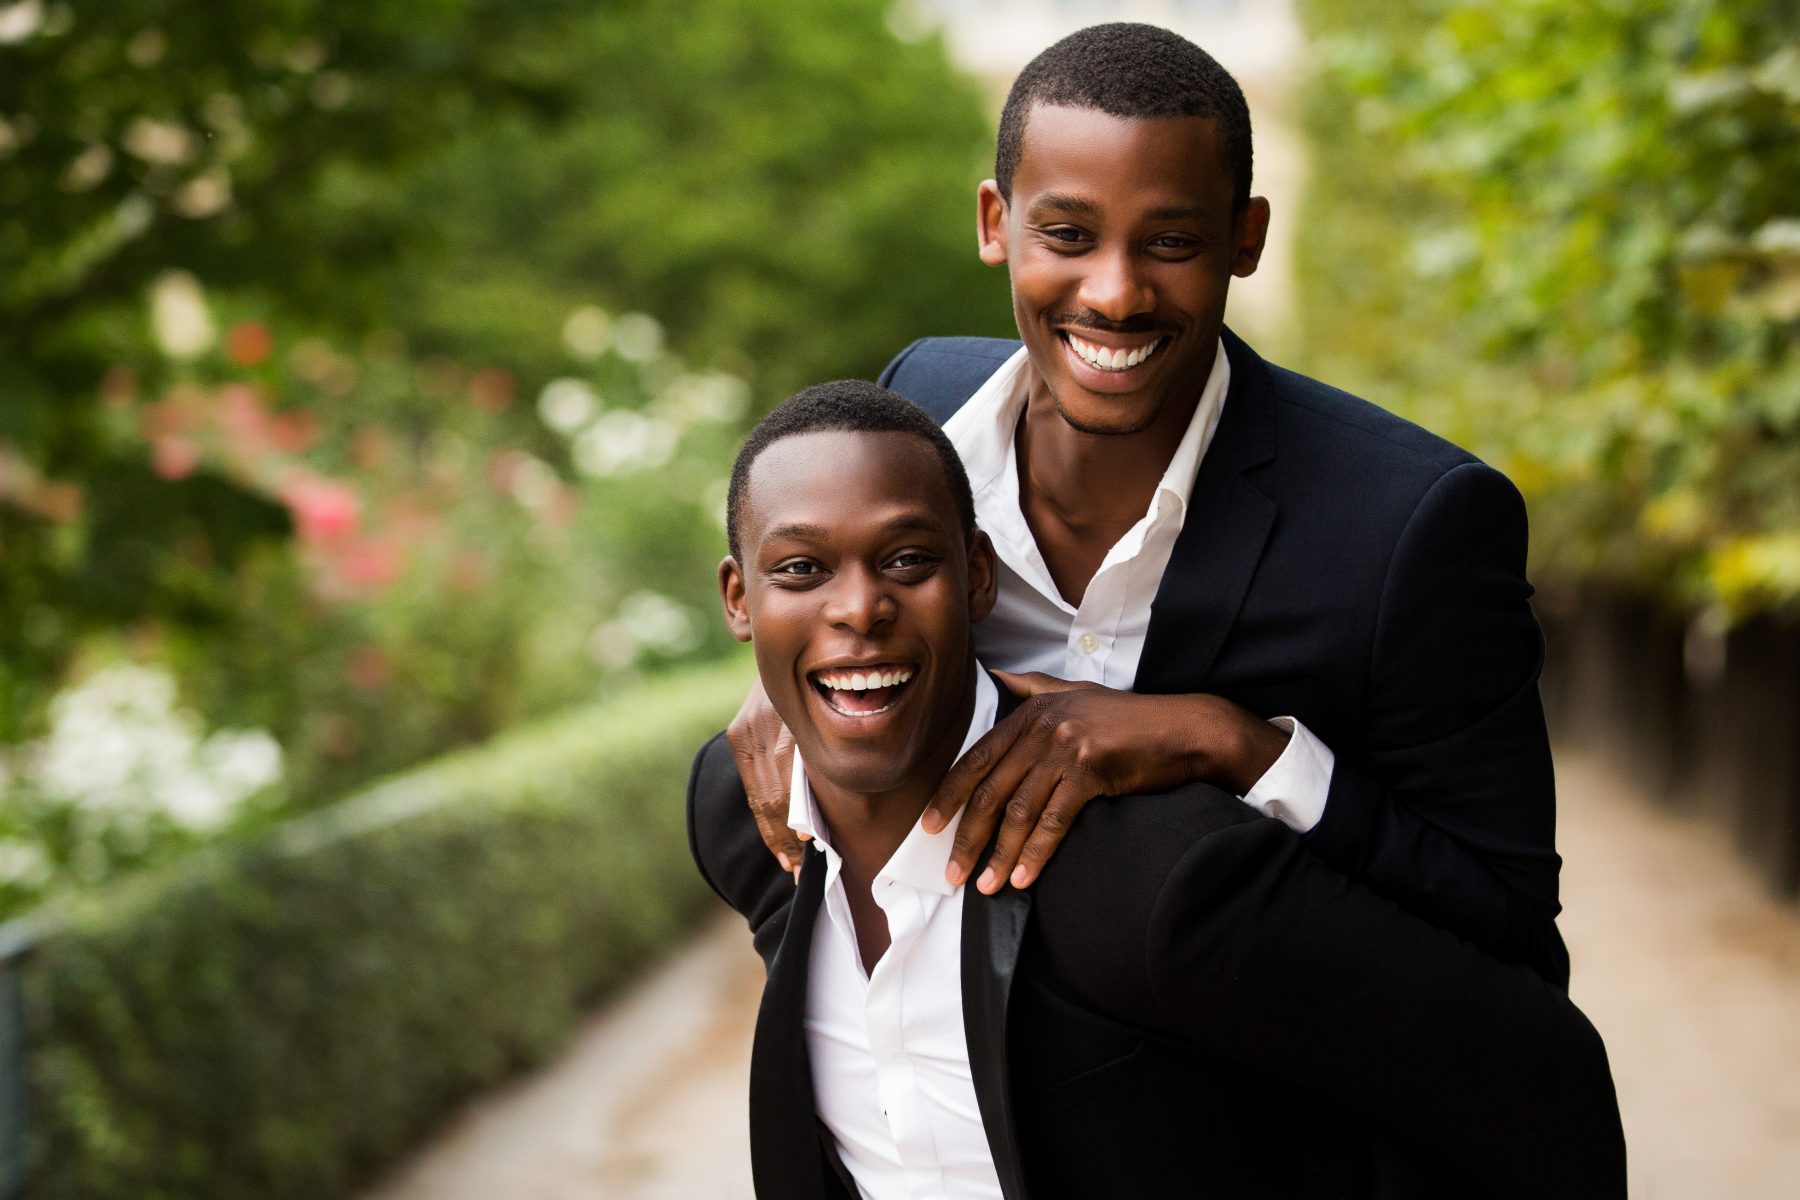 A gay couple in Paris for an engagement shoot